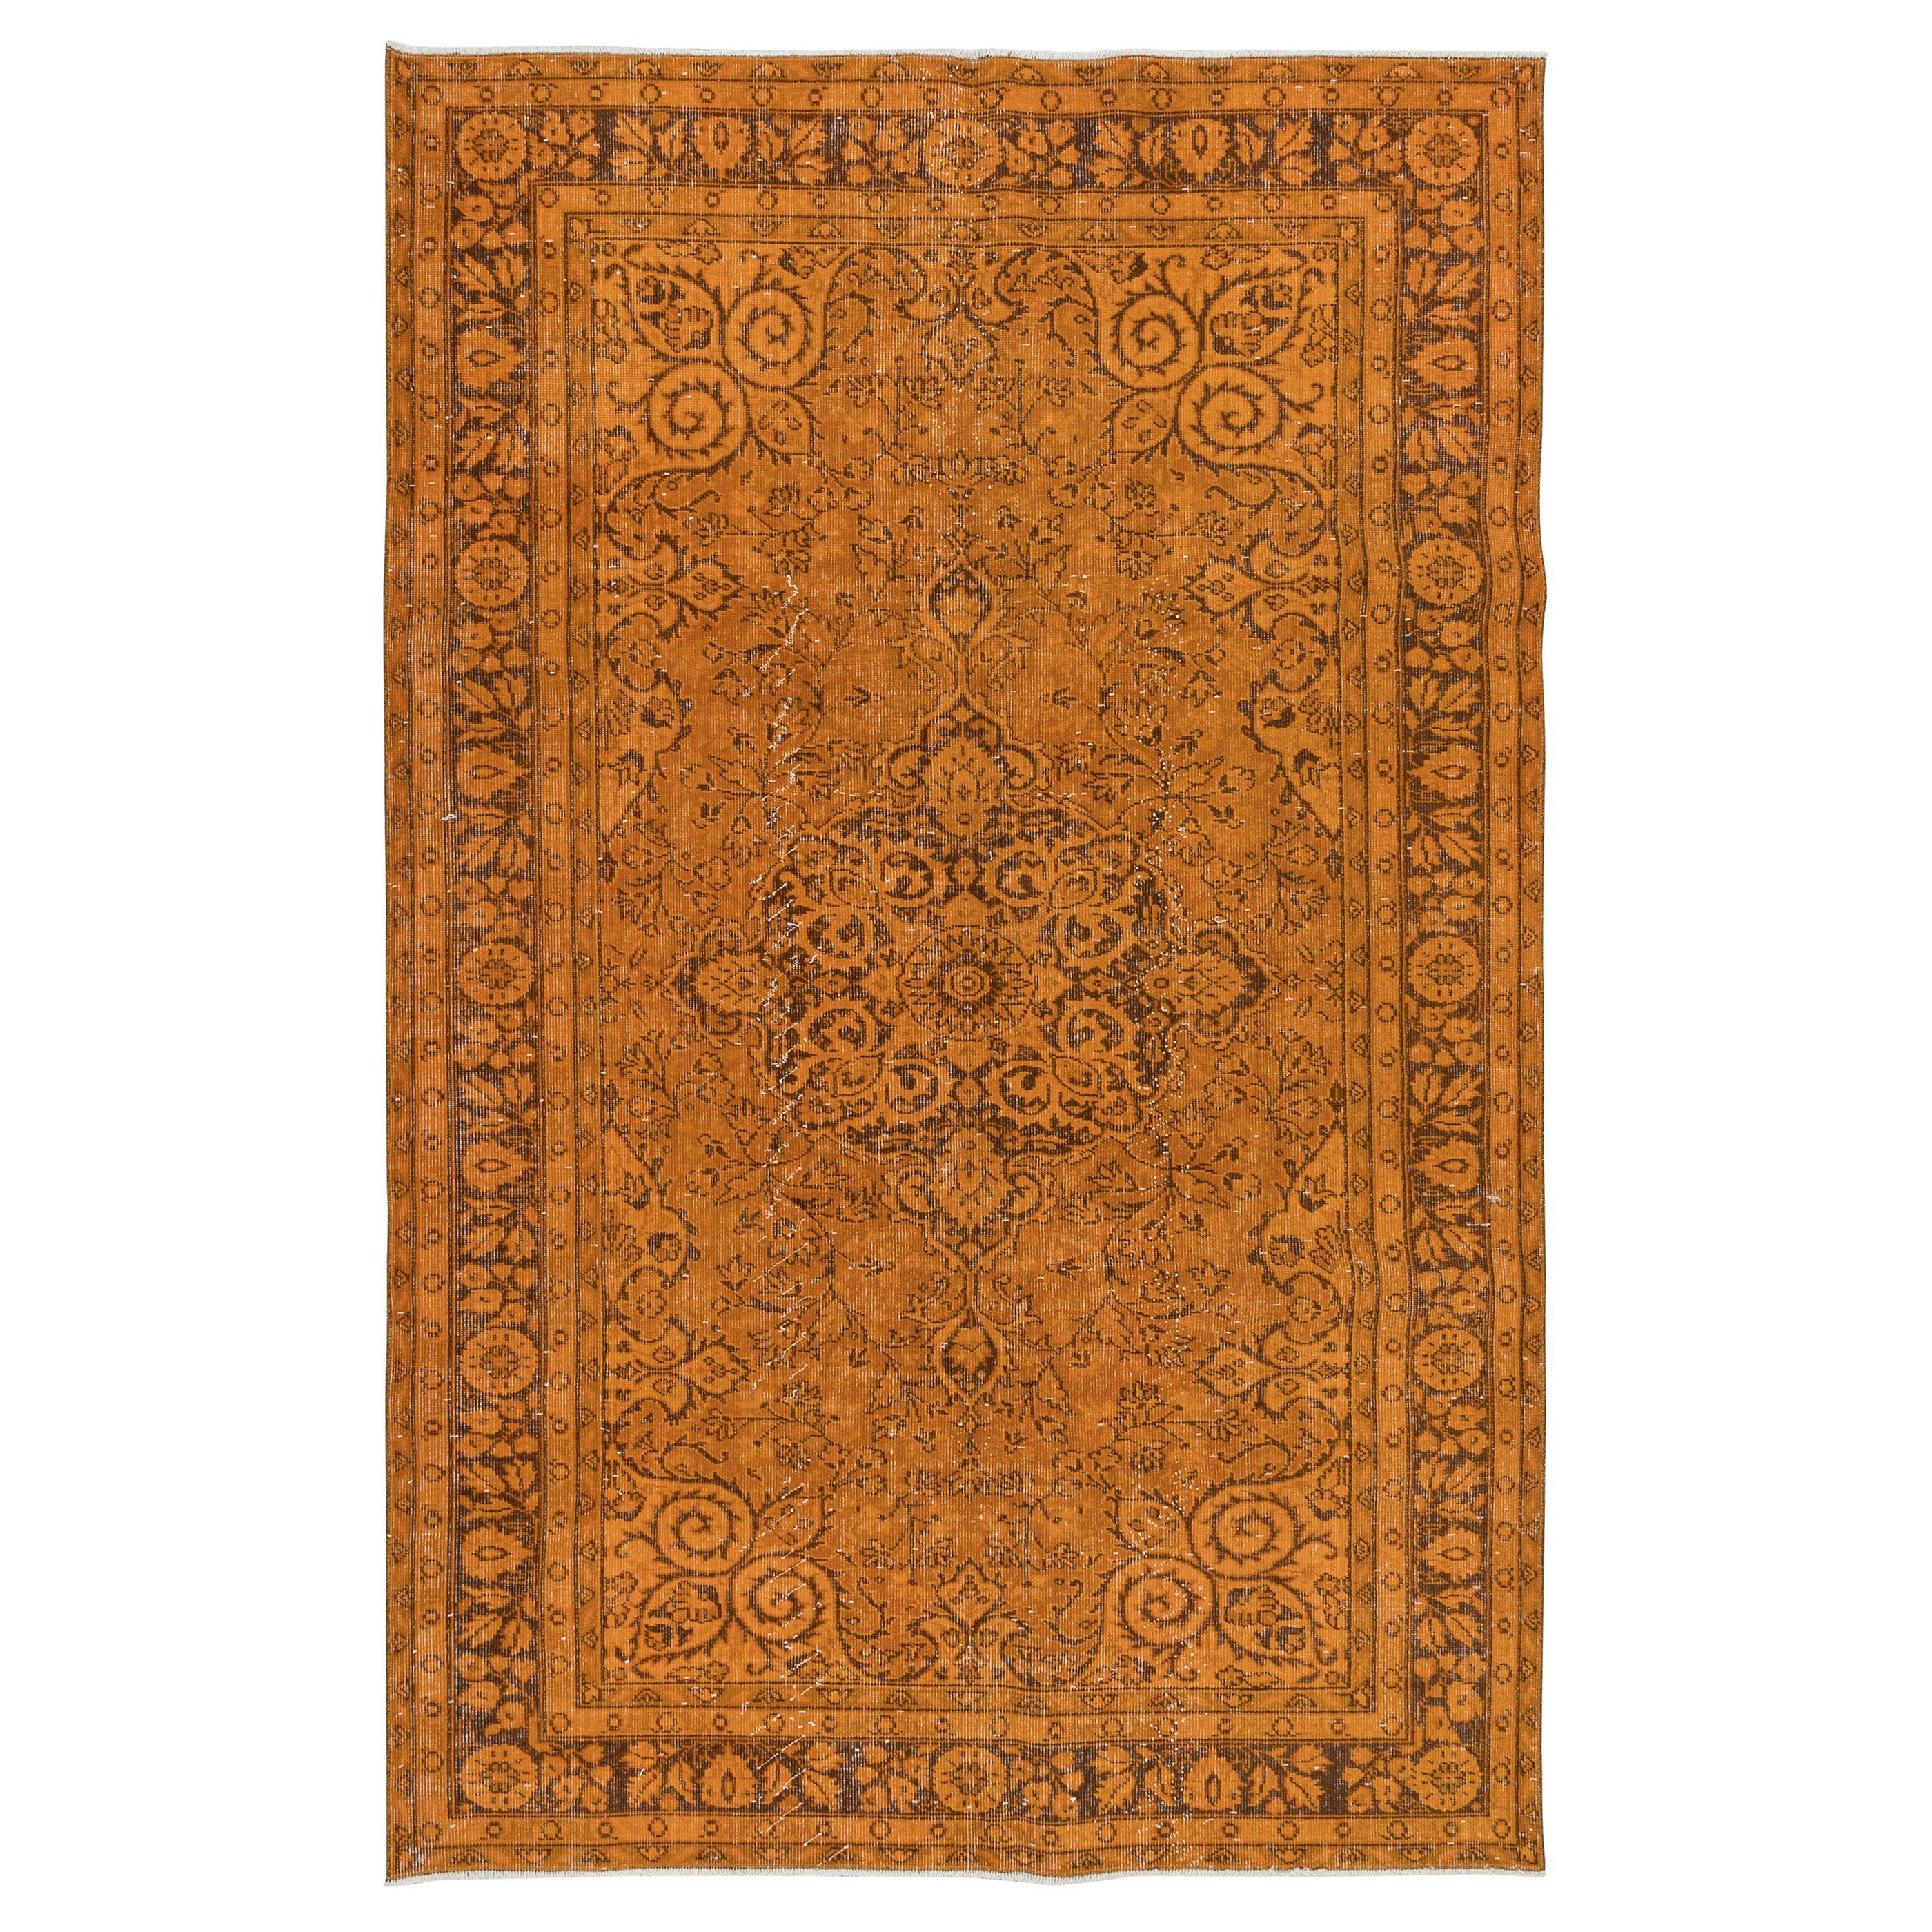 5.7x9 Ft Hand-Made Central Anatolian Area Rug in Orange, Modern Wool Carpet